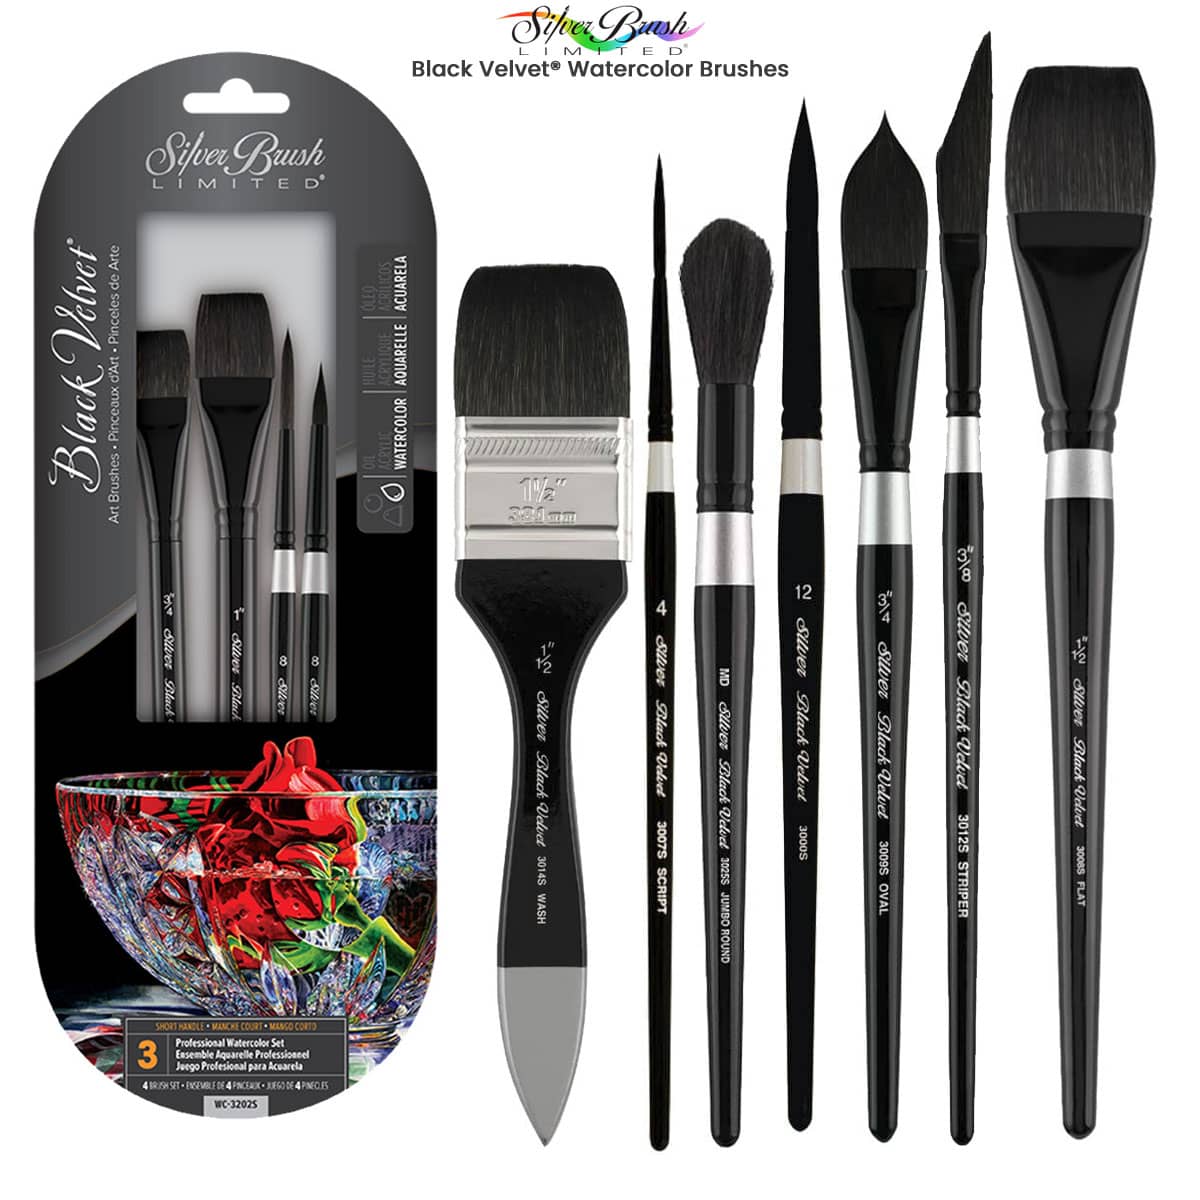 Shuttle Art 170 Pcs Artist Painting Set, Deluxe Art Set with Paint,  Aluminum and Wooden Easels, Canvas, Paper Pads, Brushes and Other Art  Supplies